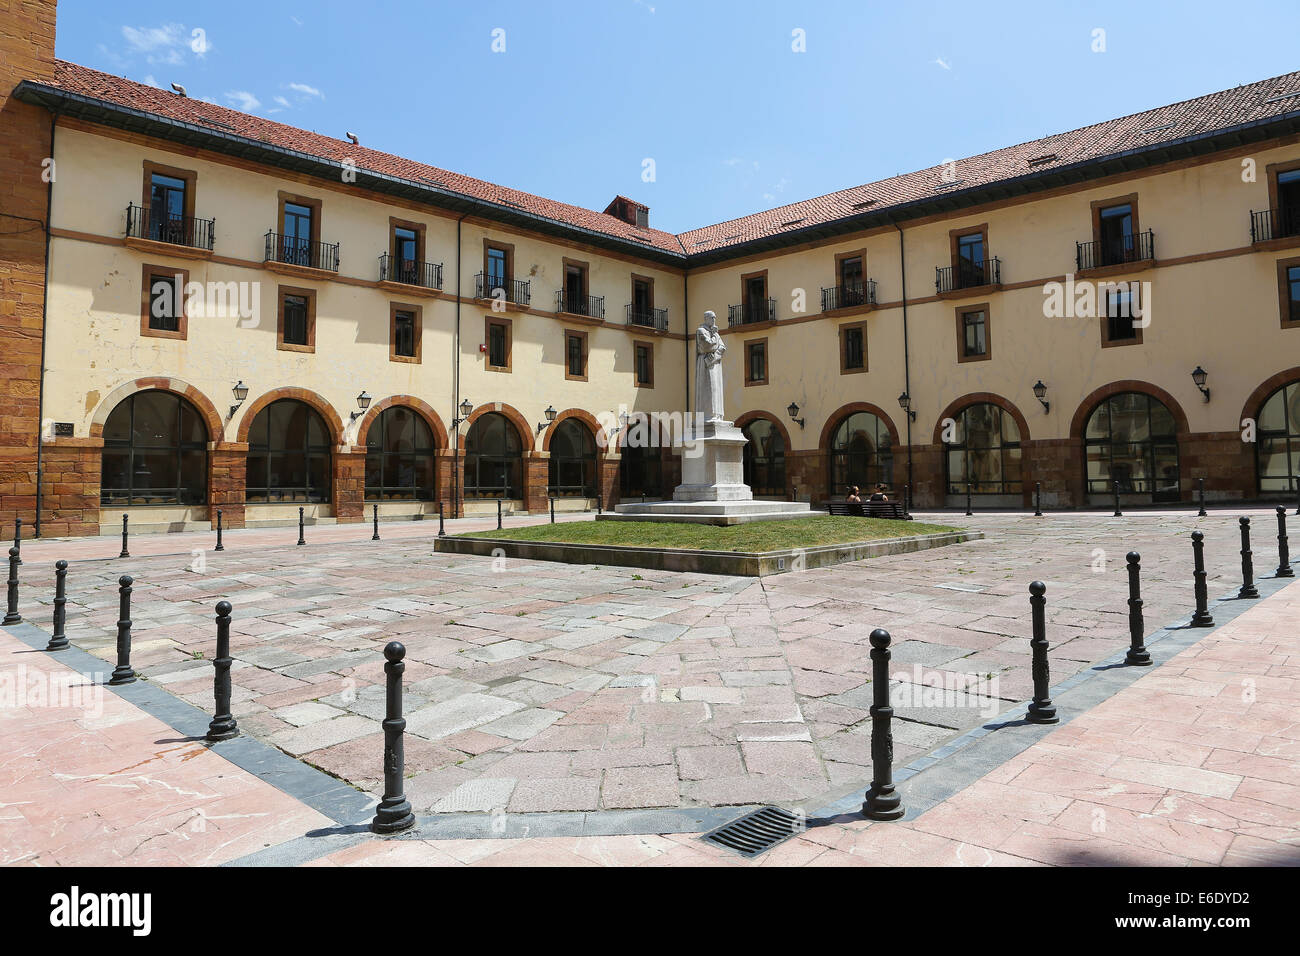 University building of the Psychology Faculty in the historic center of Oviedo, Asturias, Spain. Stock Photo